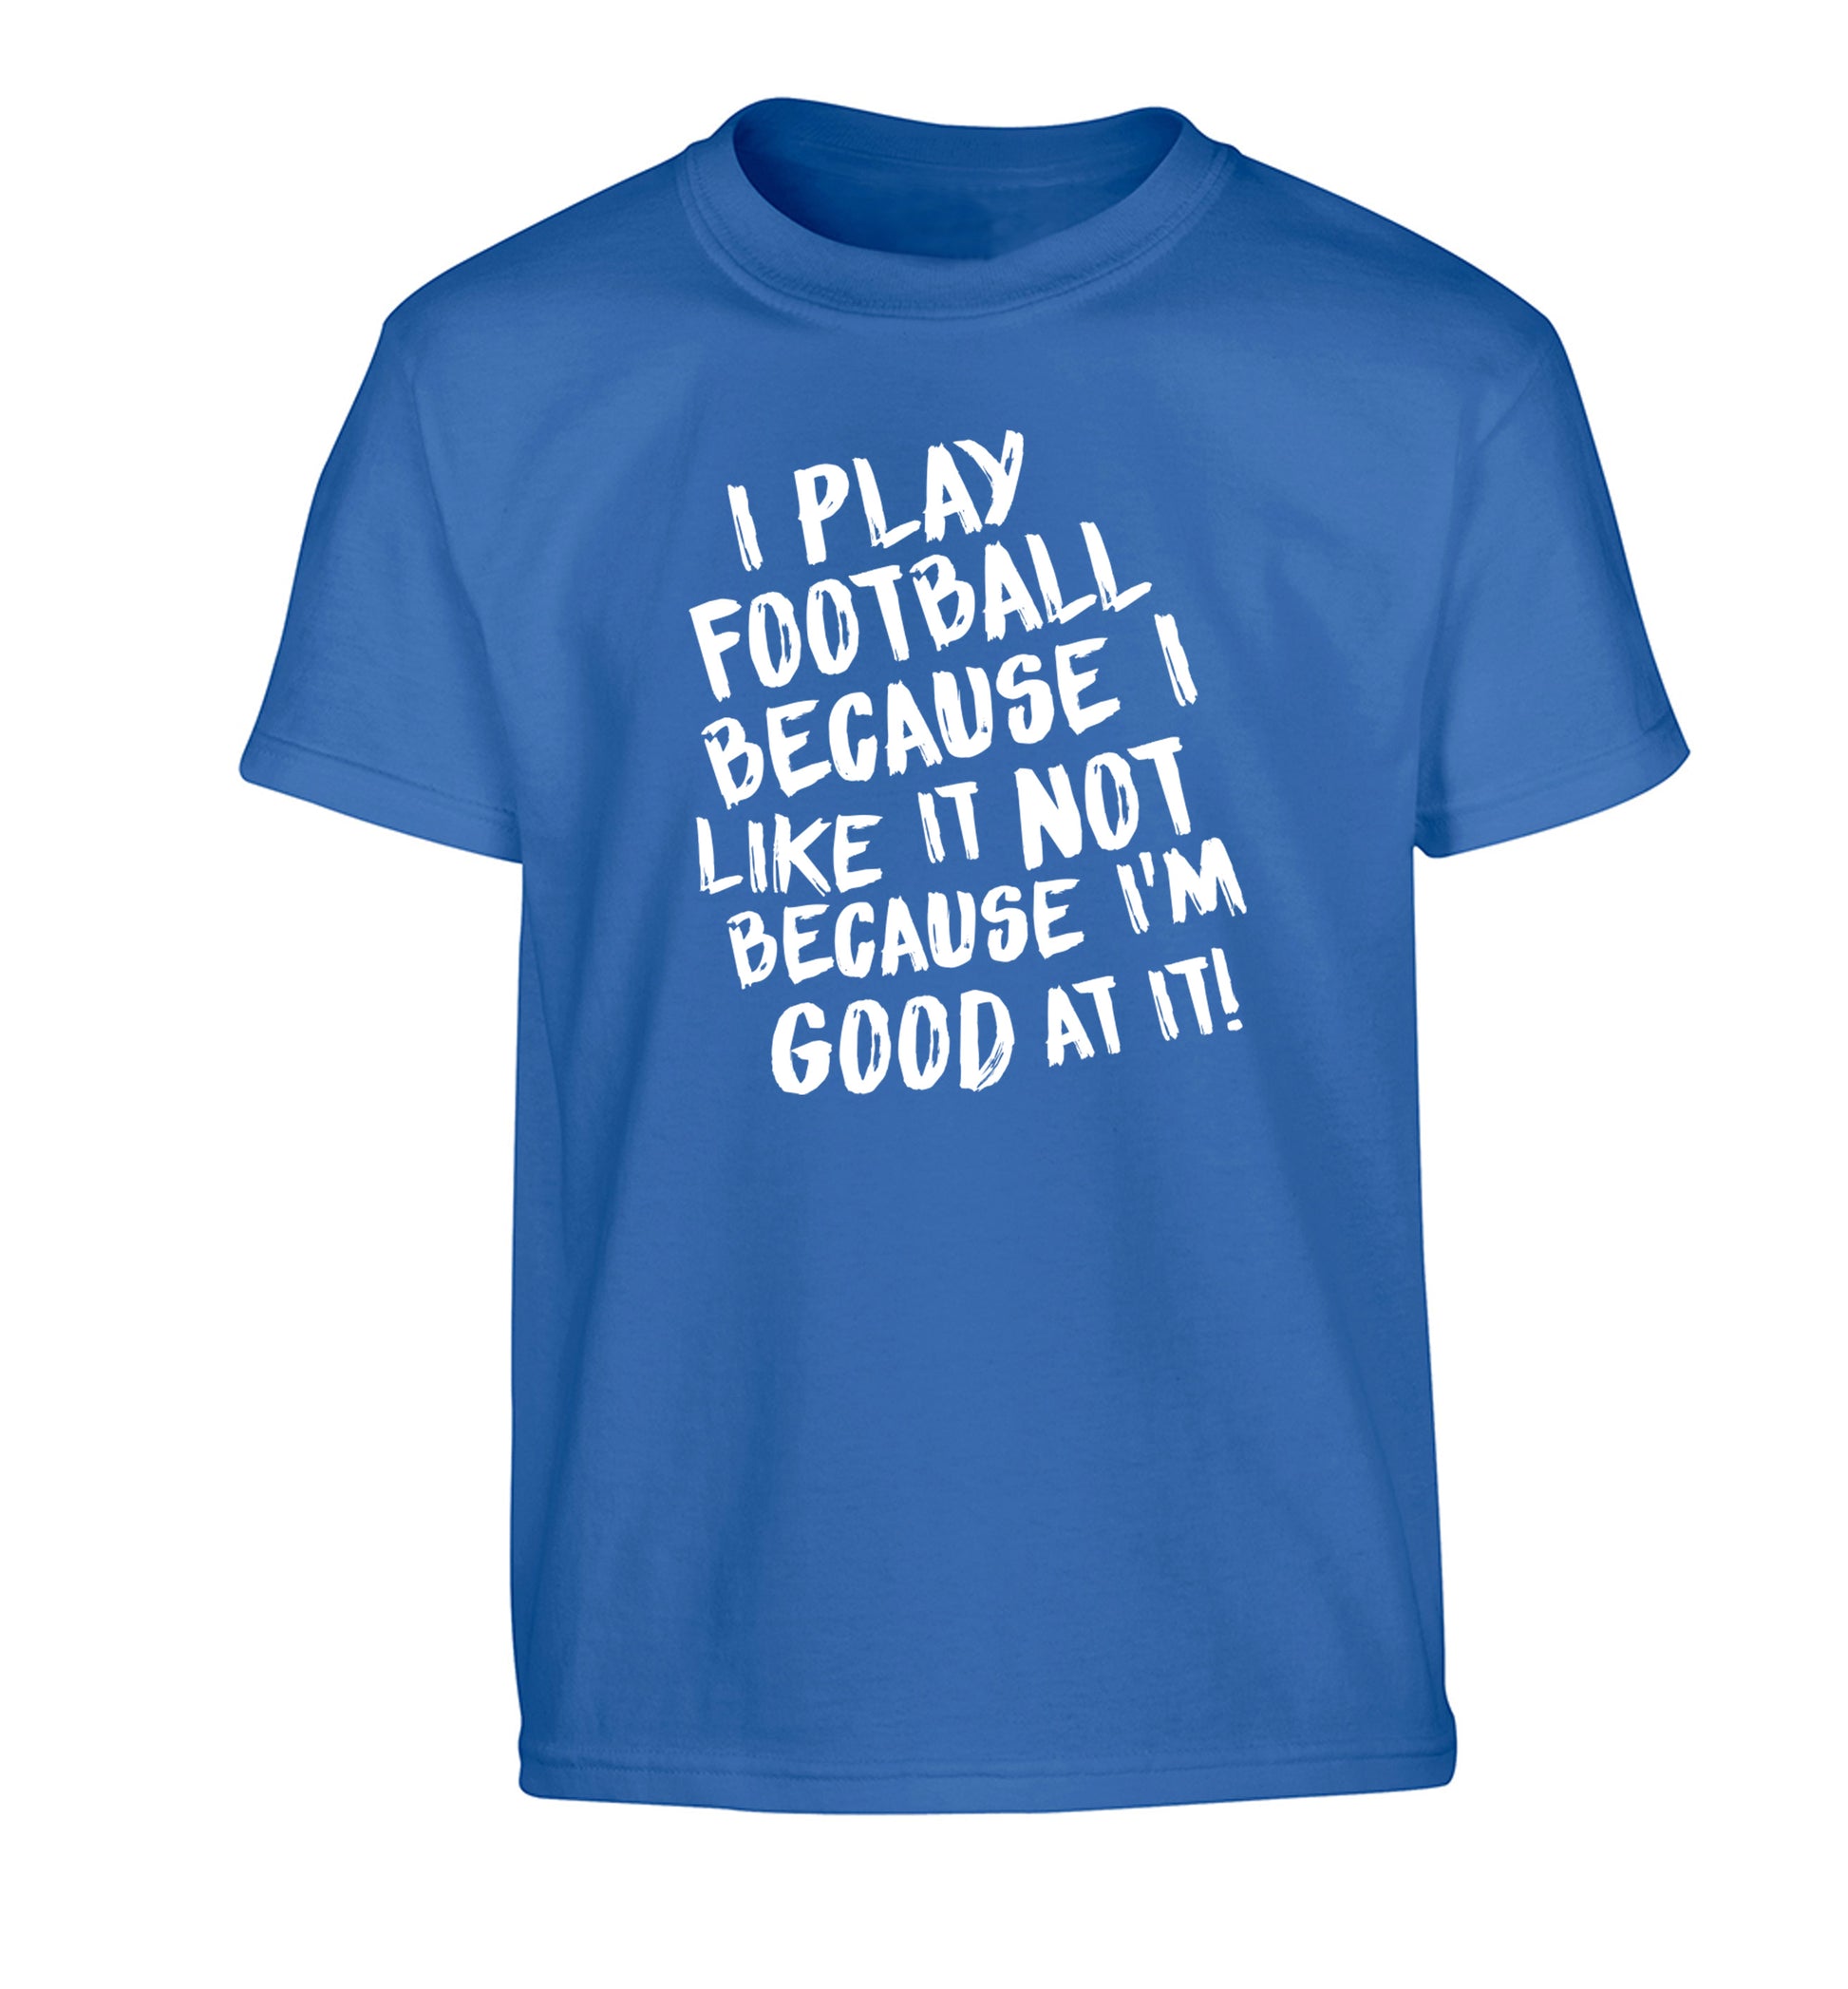 I play football because I like it not because I'm good at it Children's blue Tshirt 12-14 Years